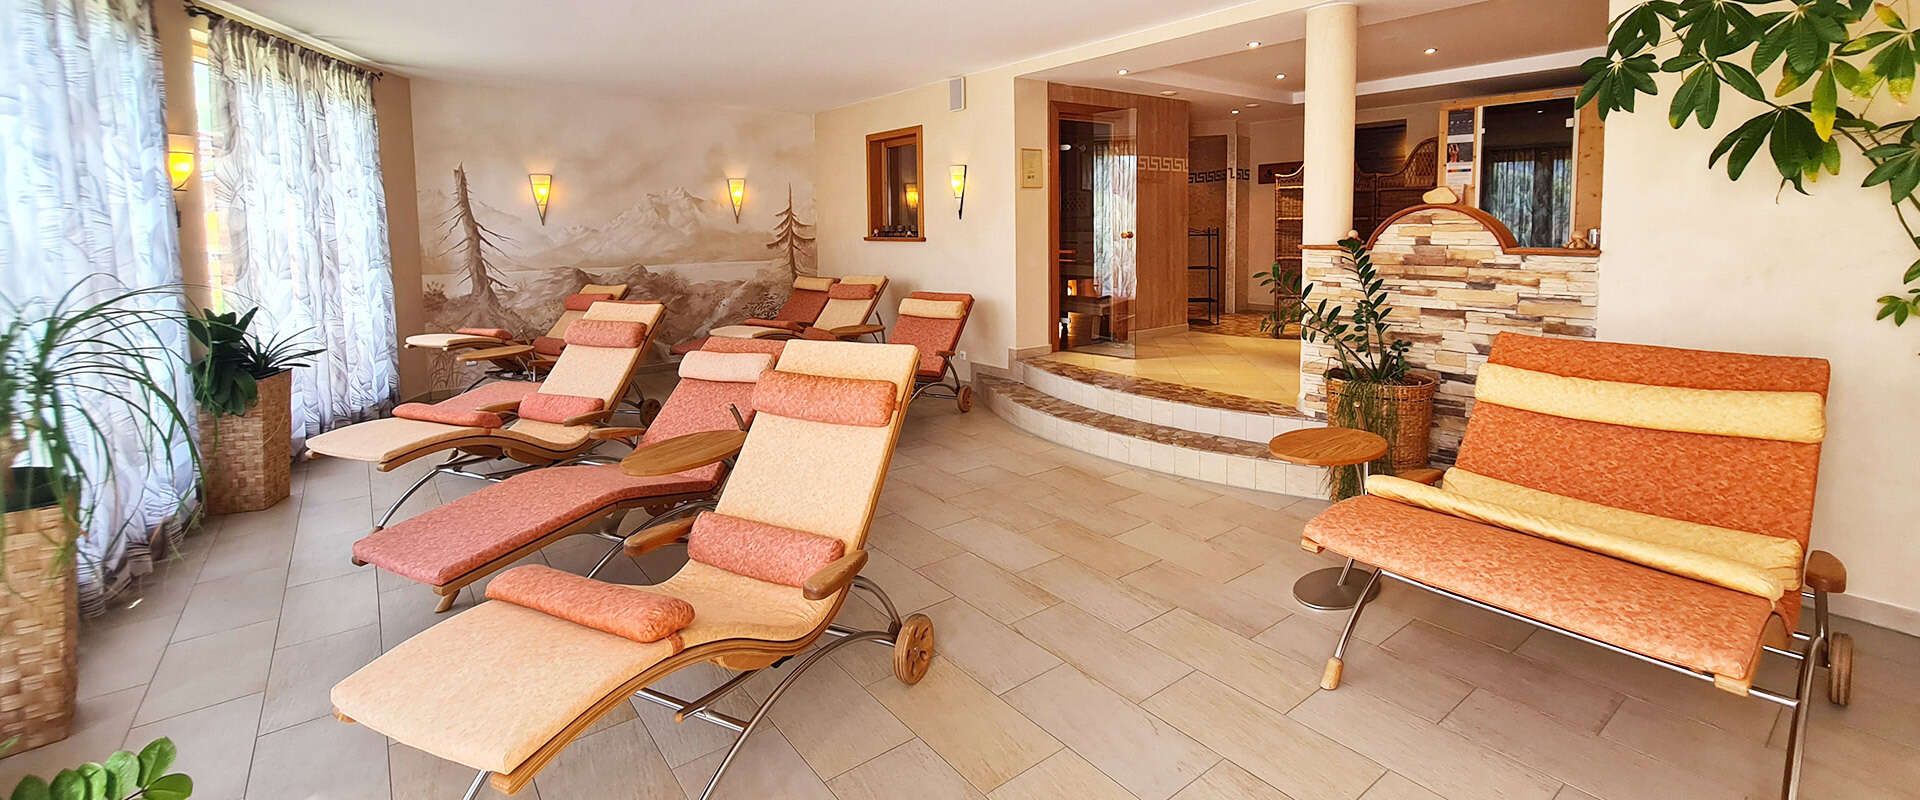 Wellness area with relaxation room at Hotel Sonnenheim in Fiss